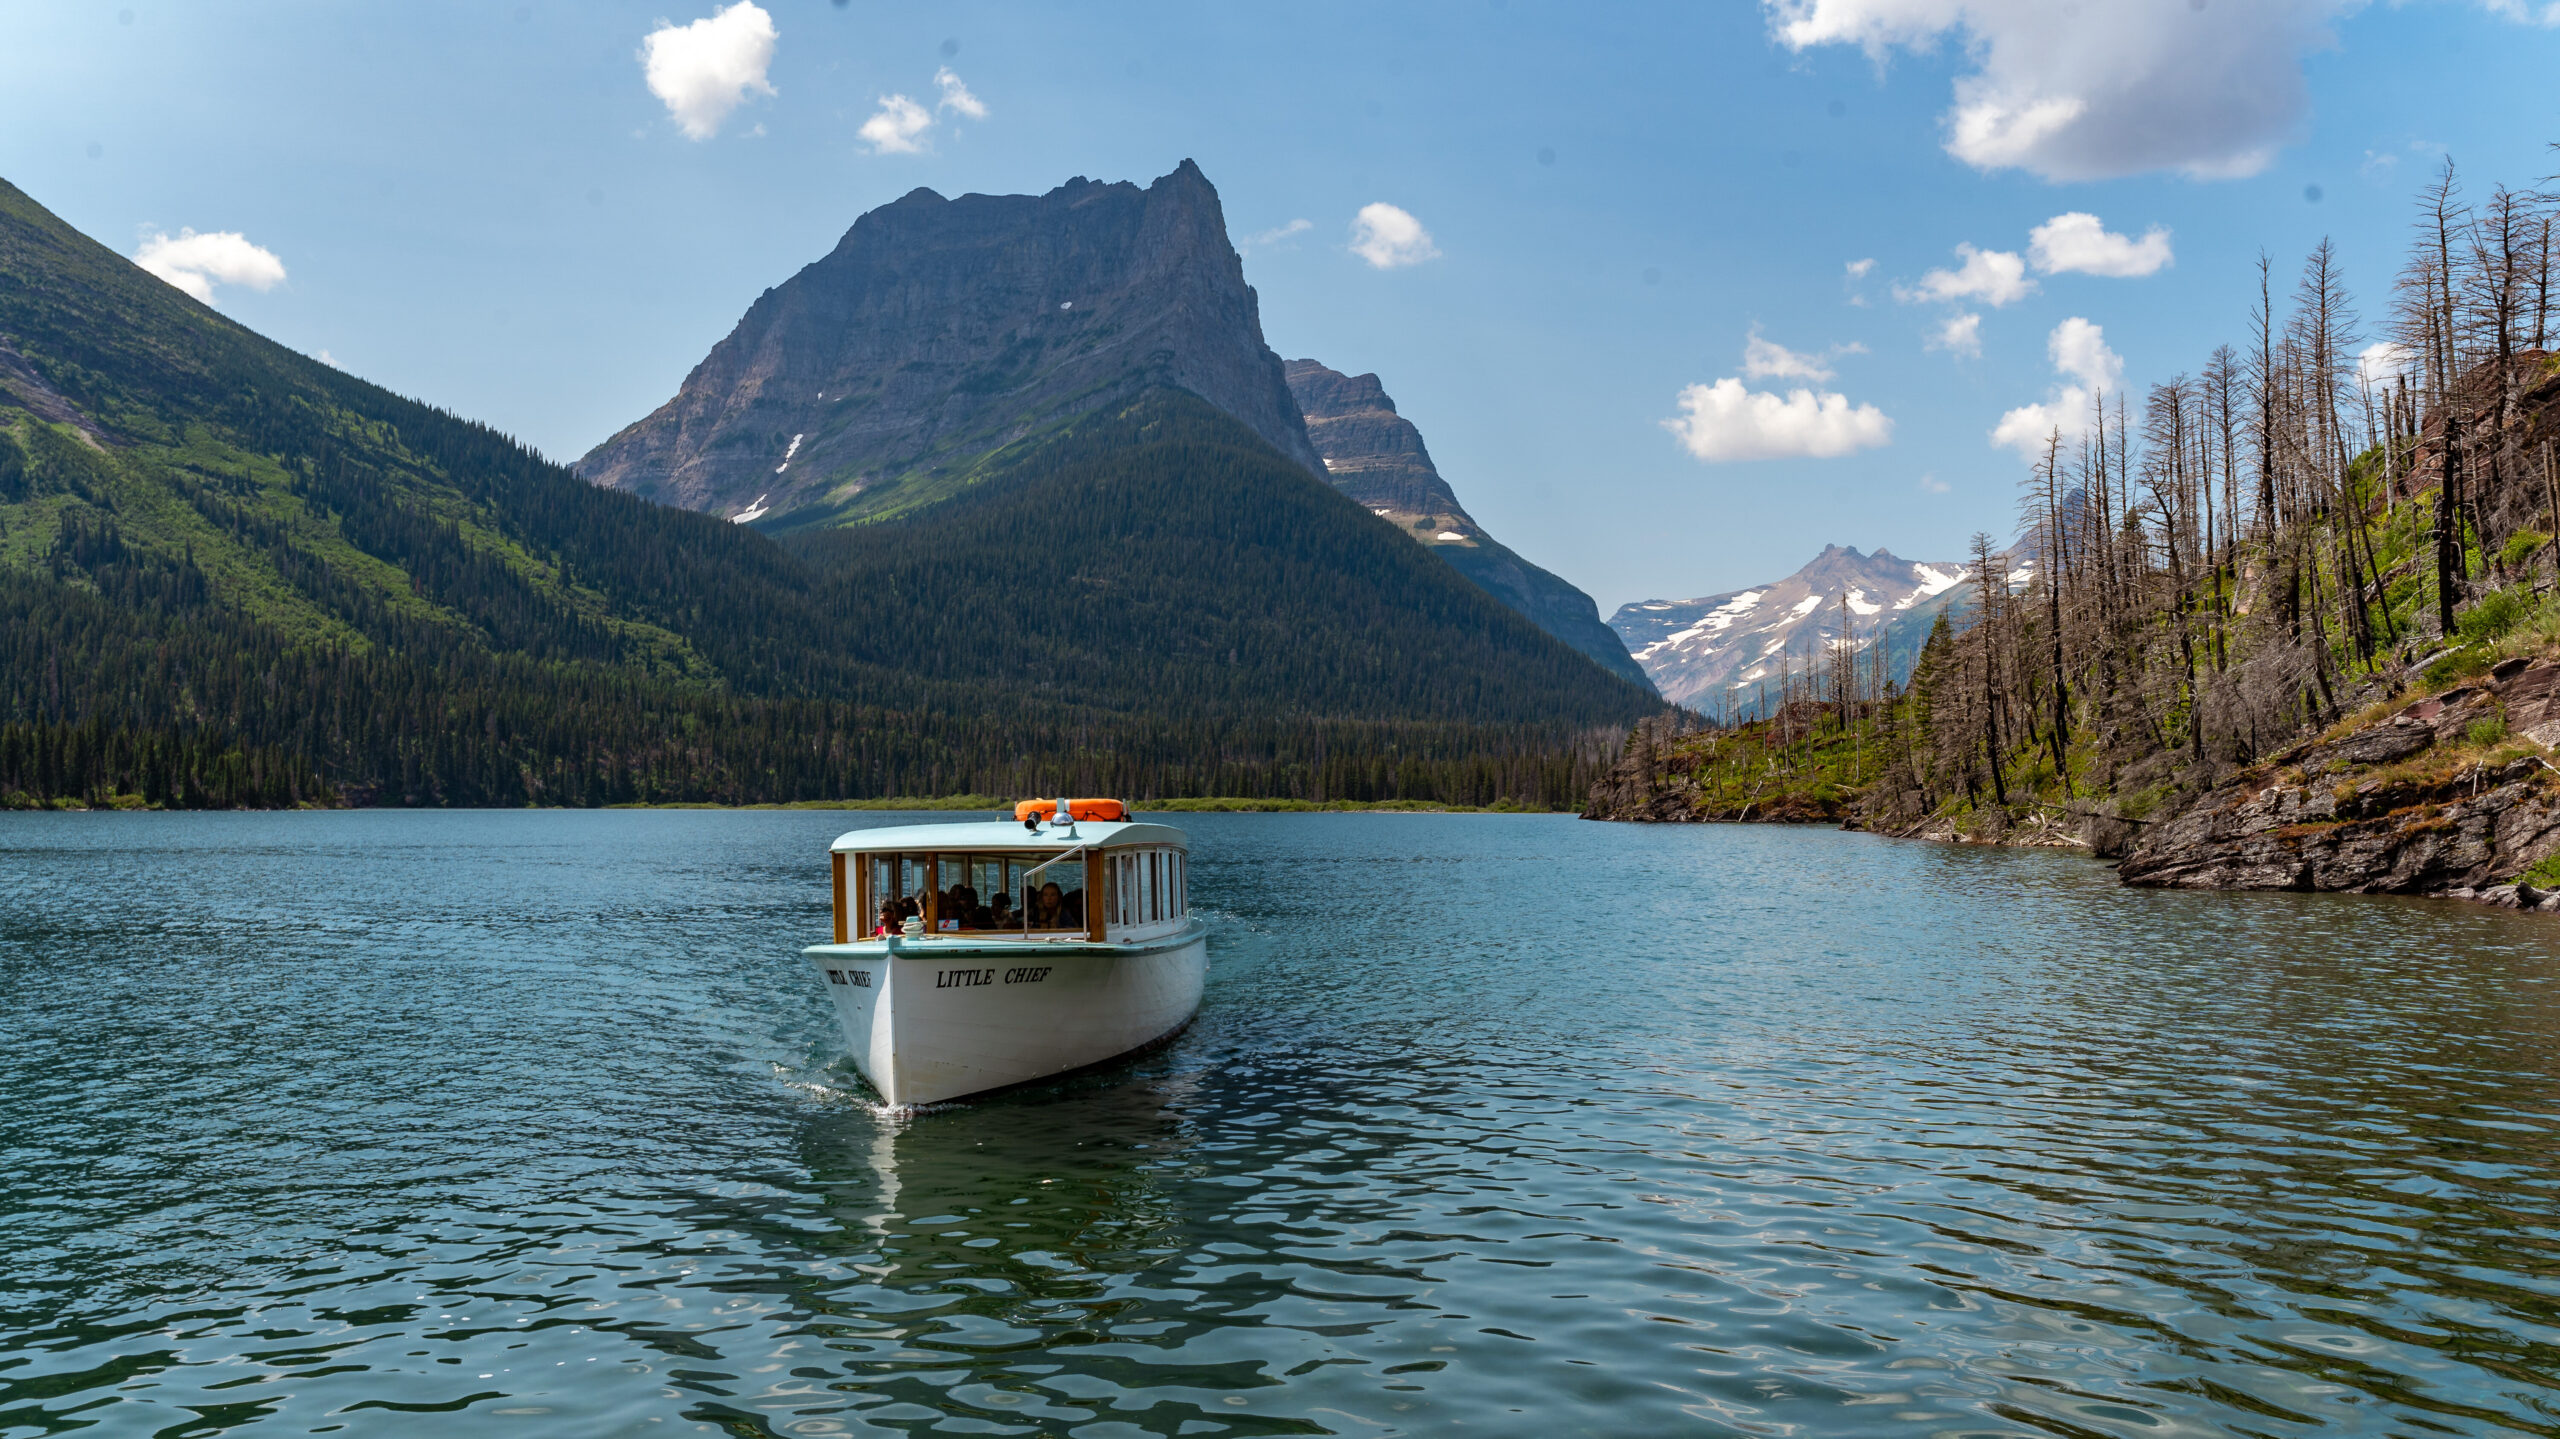 Little Chief tour boat on St. Mary's Lake, Glacier National Park